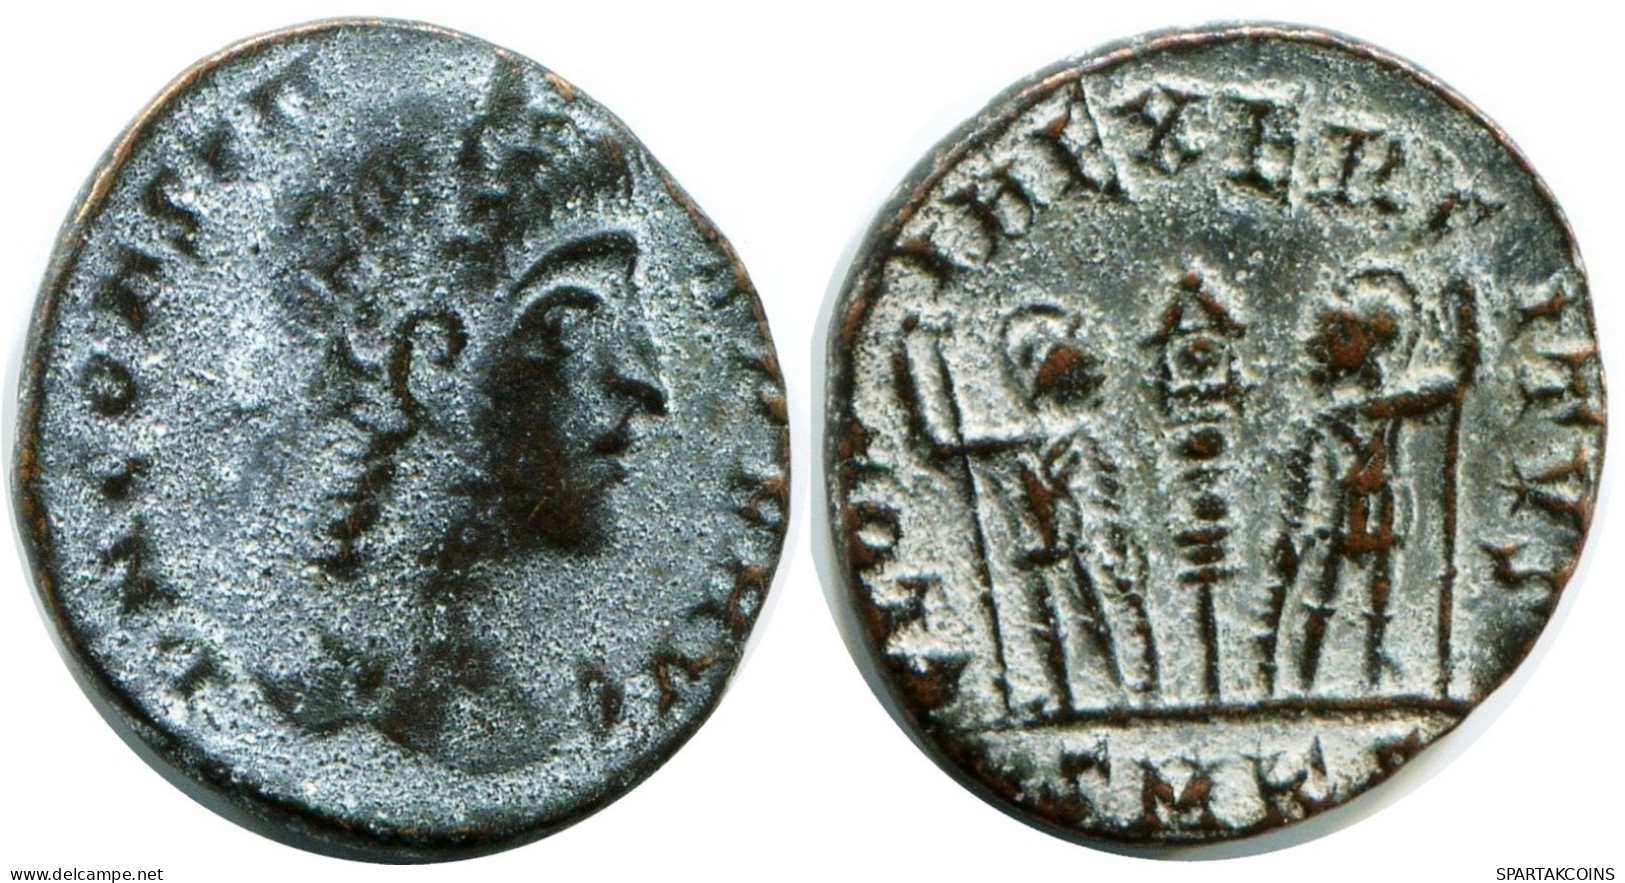 CONSTANS MINTED IN CYZICUS FOUND IN IHNASYAH HOARD EGYPT #ANC11695.14.F.A - El Imperio Christiano (307 / 363)